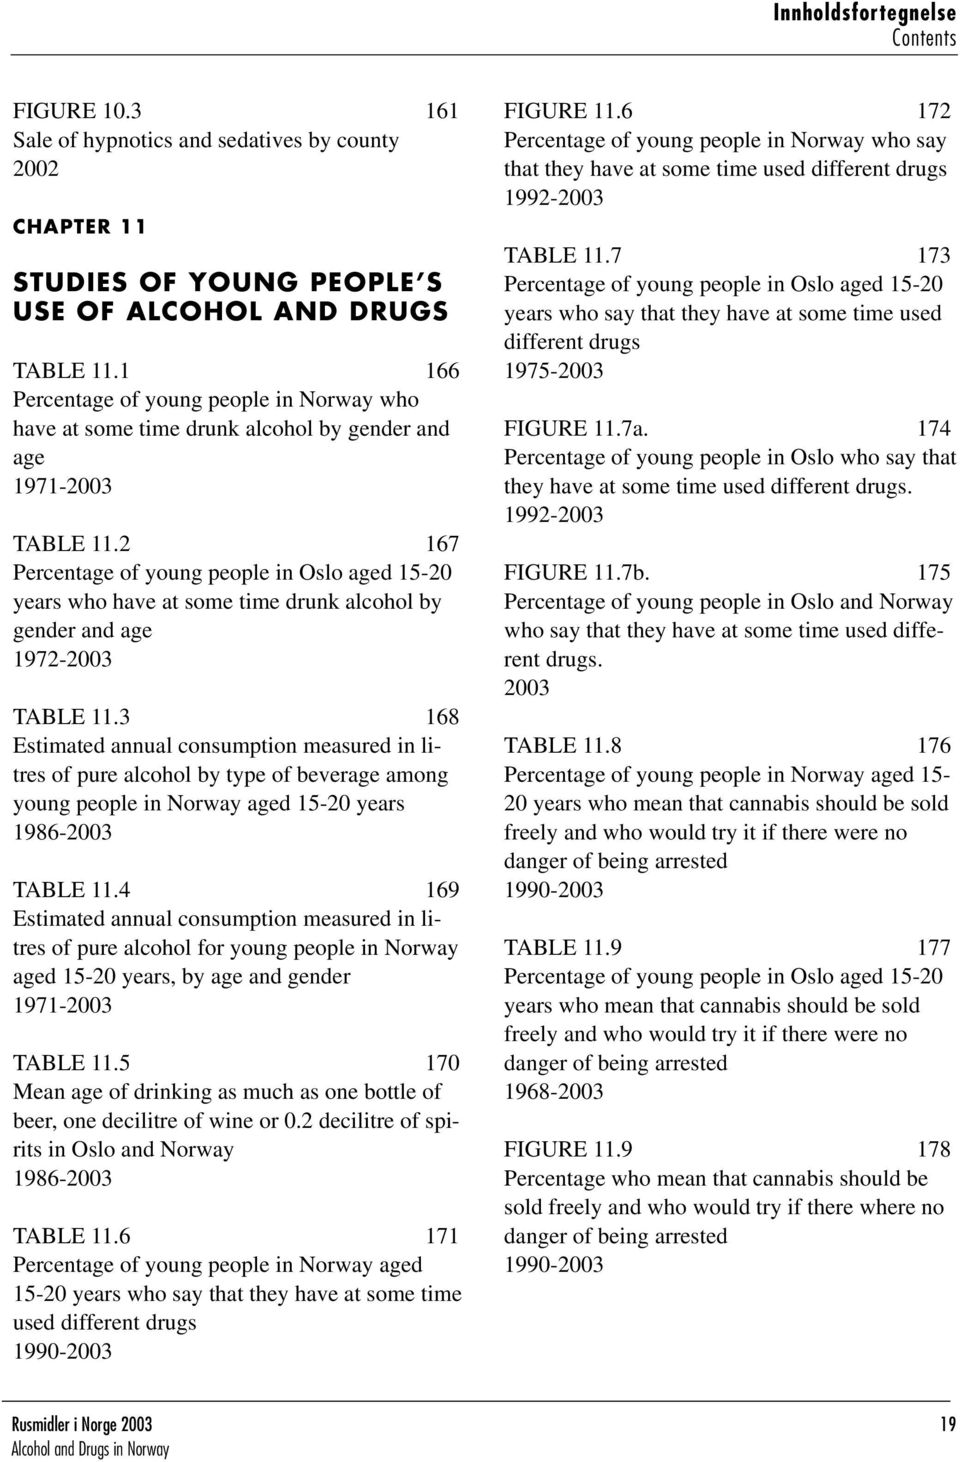 2 167 Percentage of young people in Oslo aged 15-20 years who have at some time drunk alcohol by gender and age 1972-2003 TABLE 11.